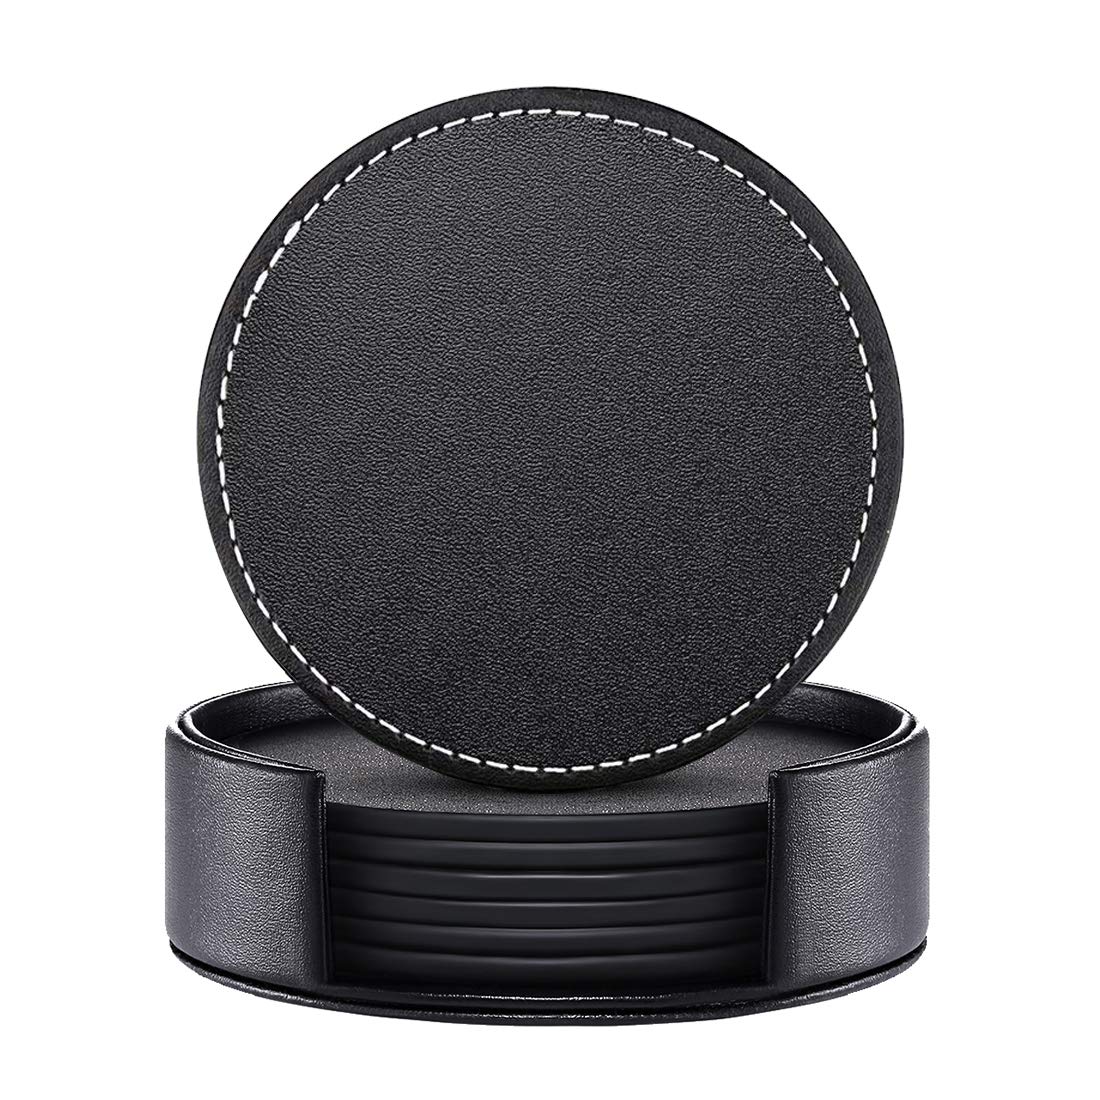 Leather Coasters, Set of 6 PU coaster with Holder, Protect Furniture from Water (Black, Round)